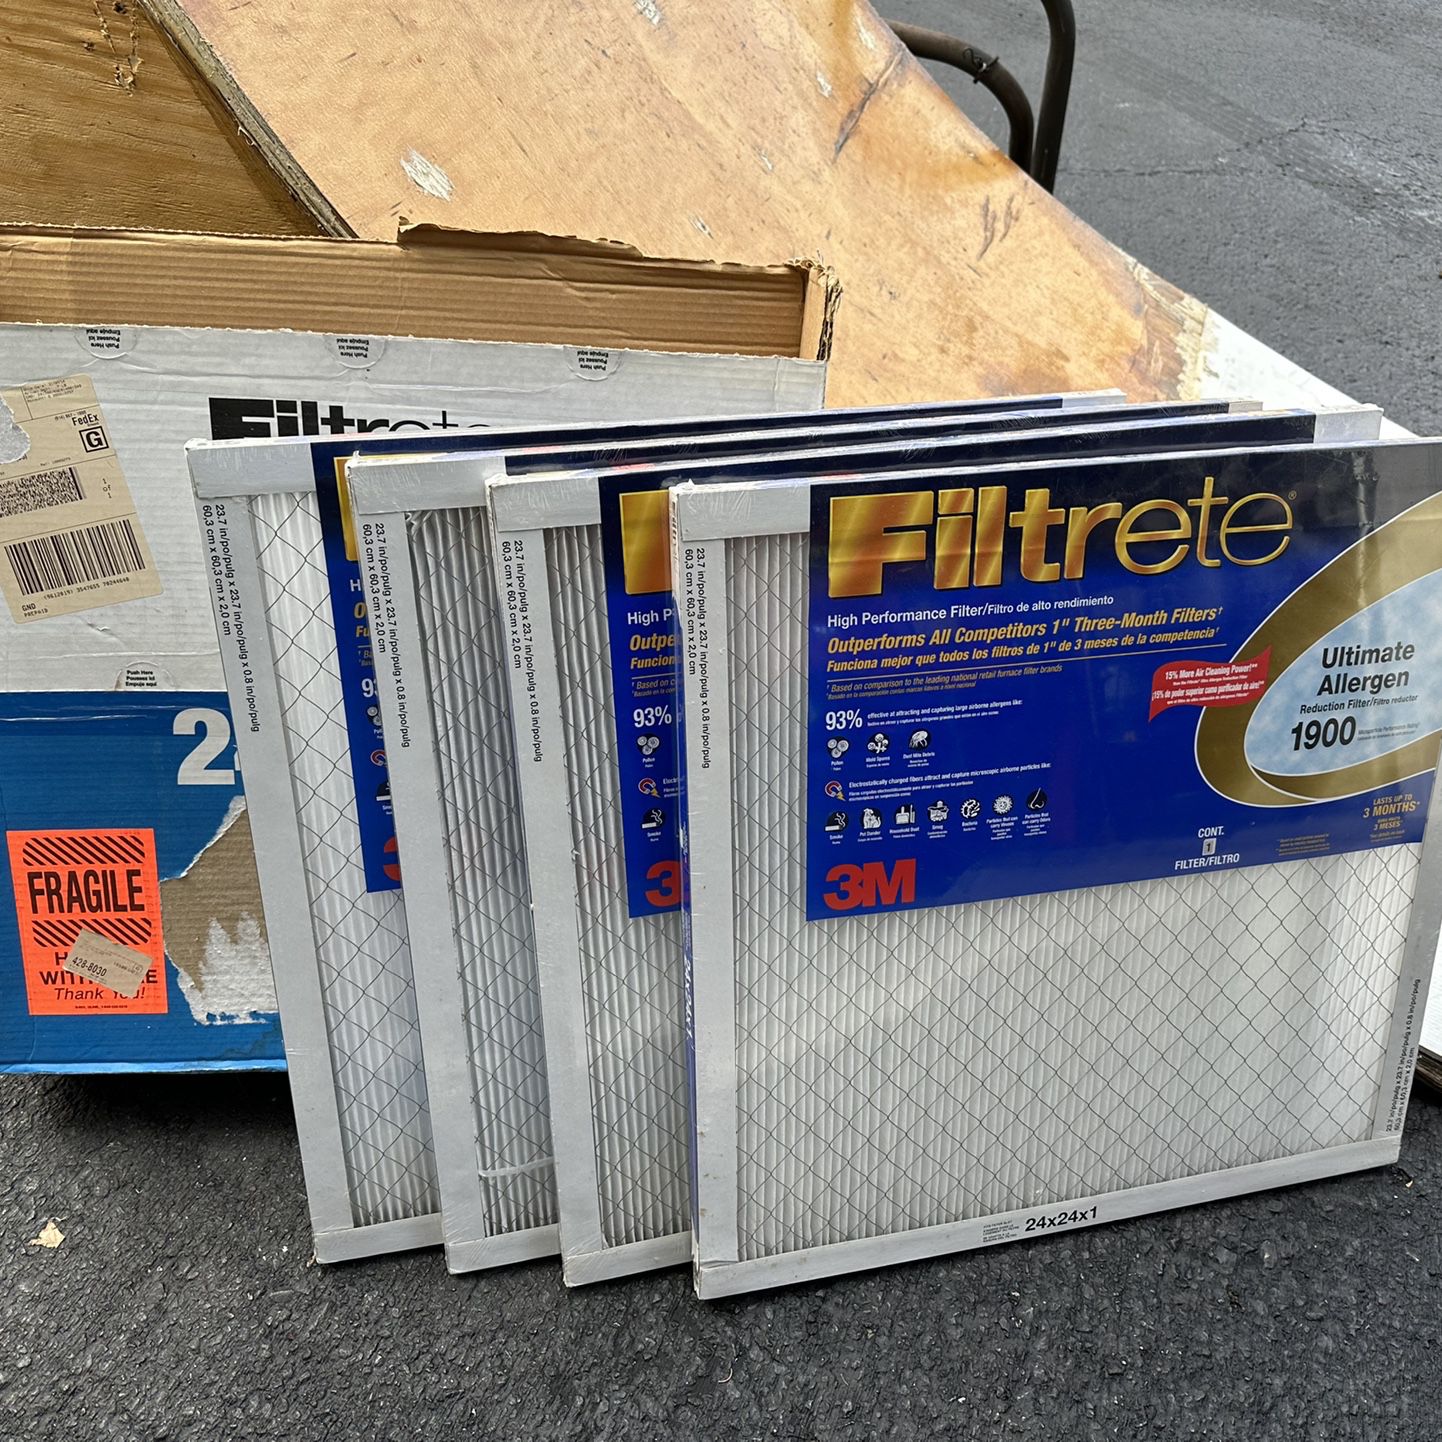 Set Of 4: Filtrete Furnace Filters 1900 Reduction Filter Size: 24x24x1, New In Plastic Wrap.  Sells Online For $85